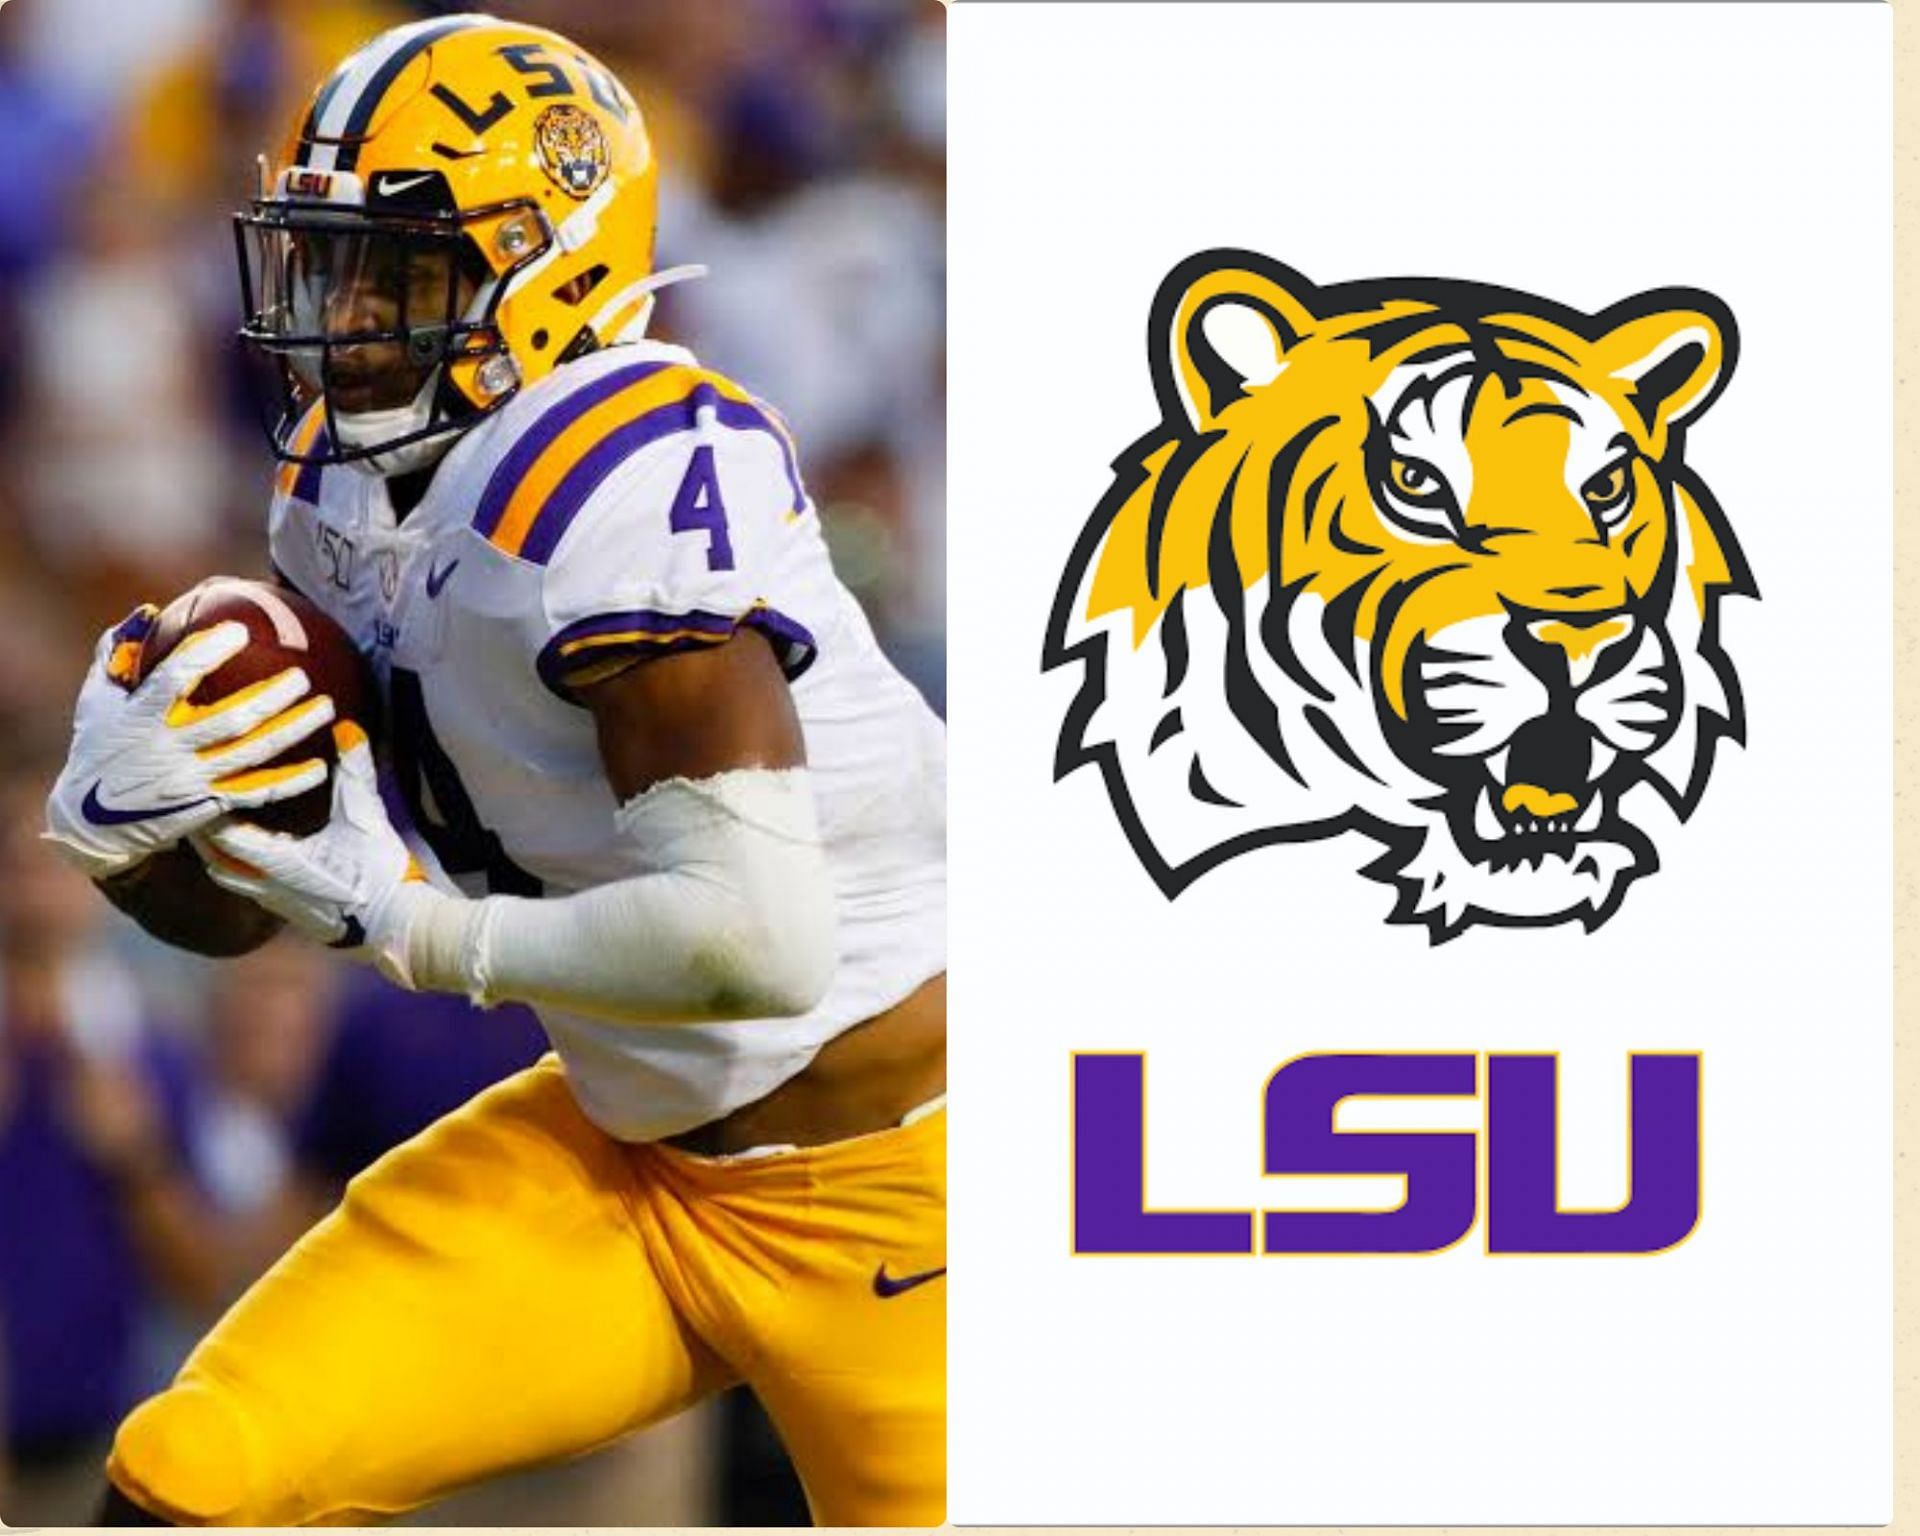 LSU face FSU on Sunday without their star receiver, John Emery 